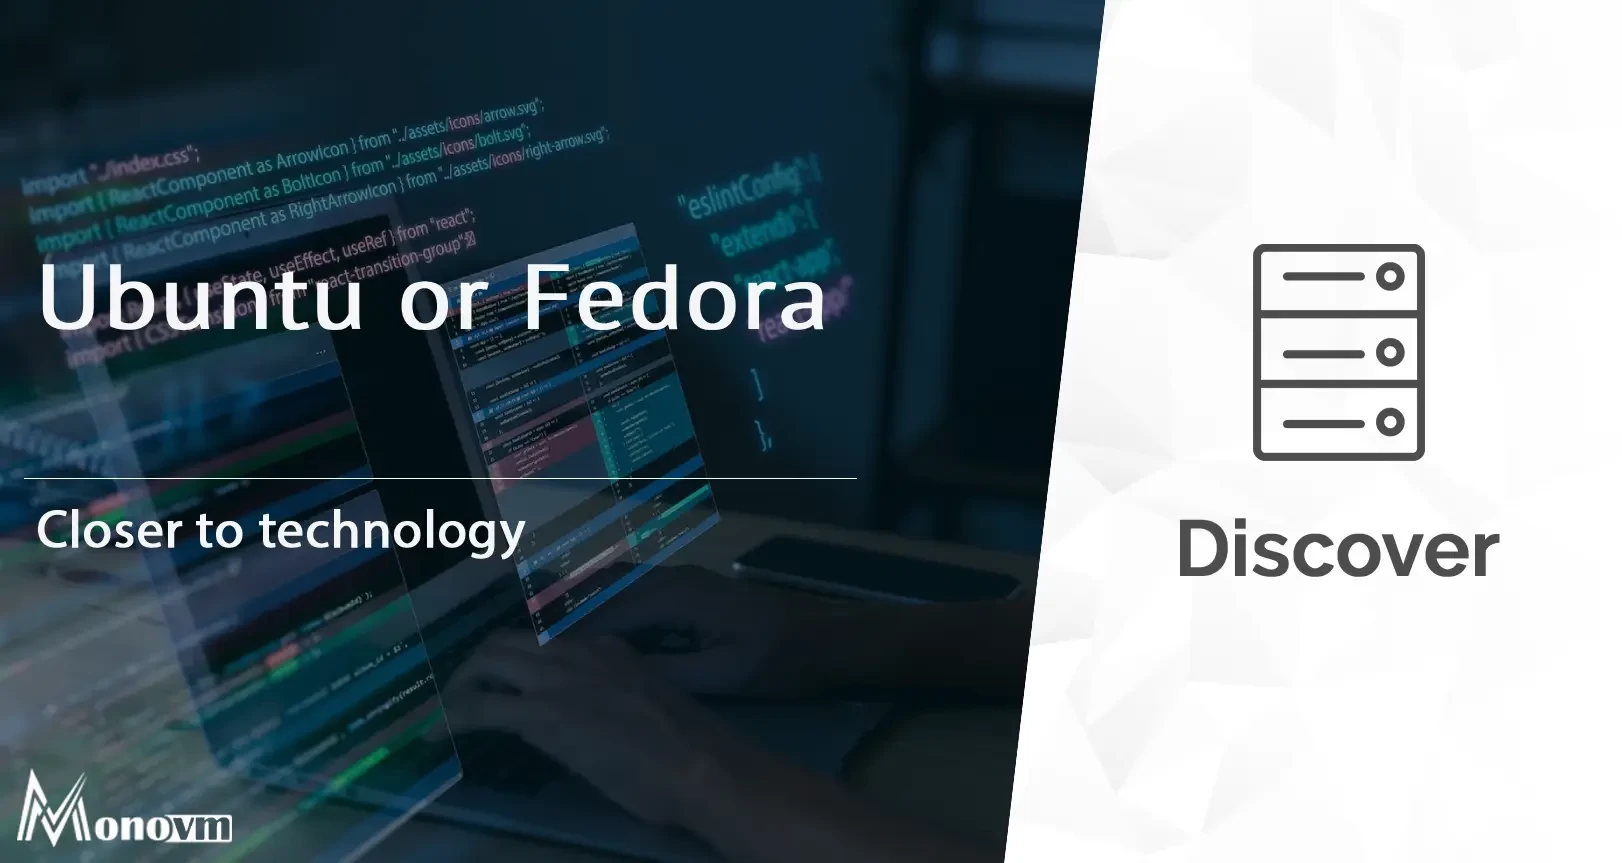 Ubuntu or Fedora: Which One Should You Use and Why